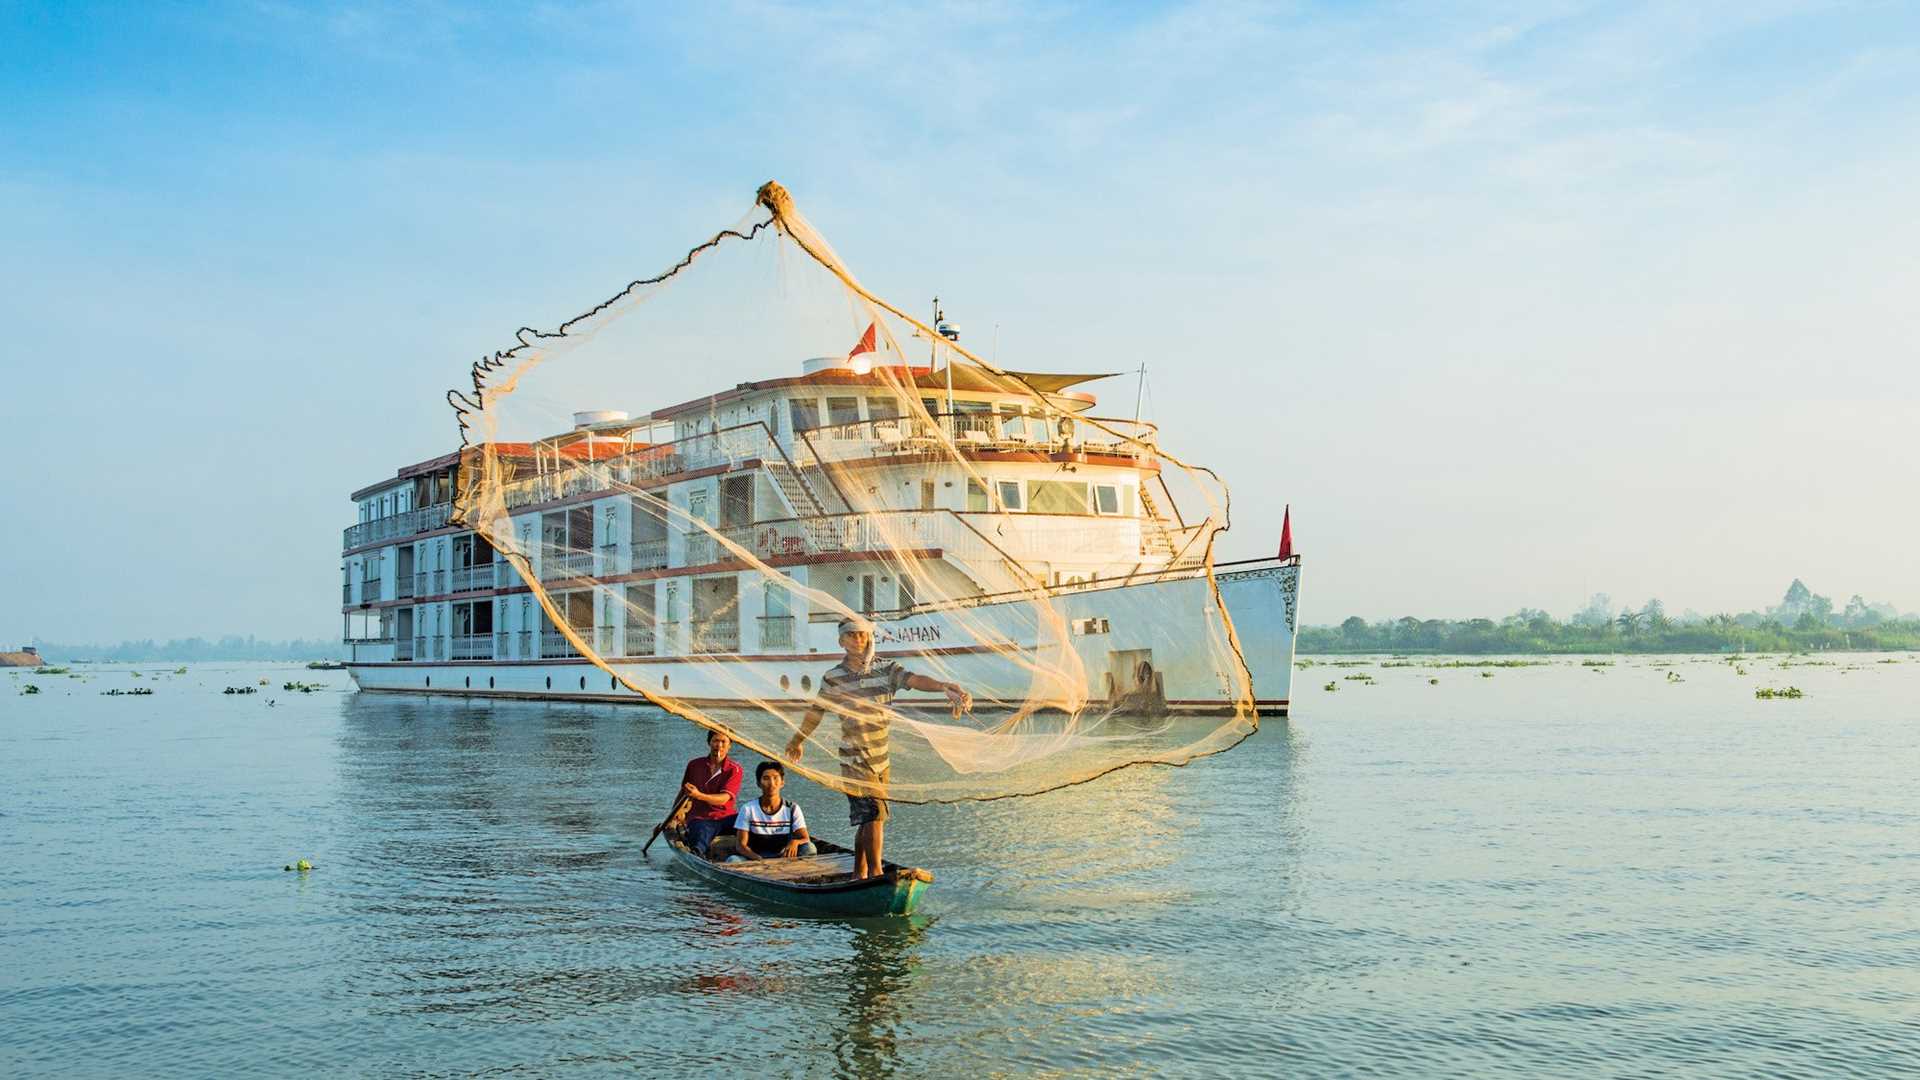 A fisherman on a small watercraft casts a net into the Mekong River with The Jahan riverboat in the background